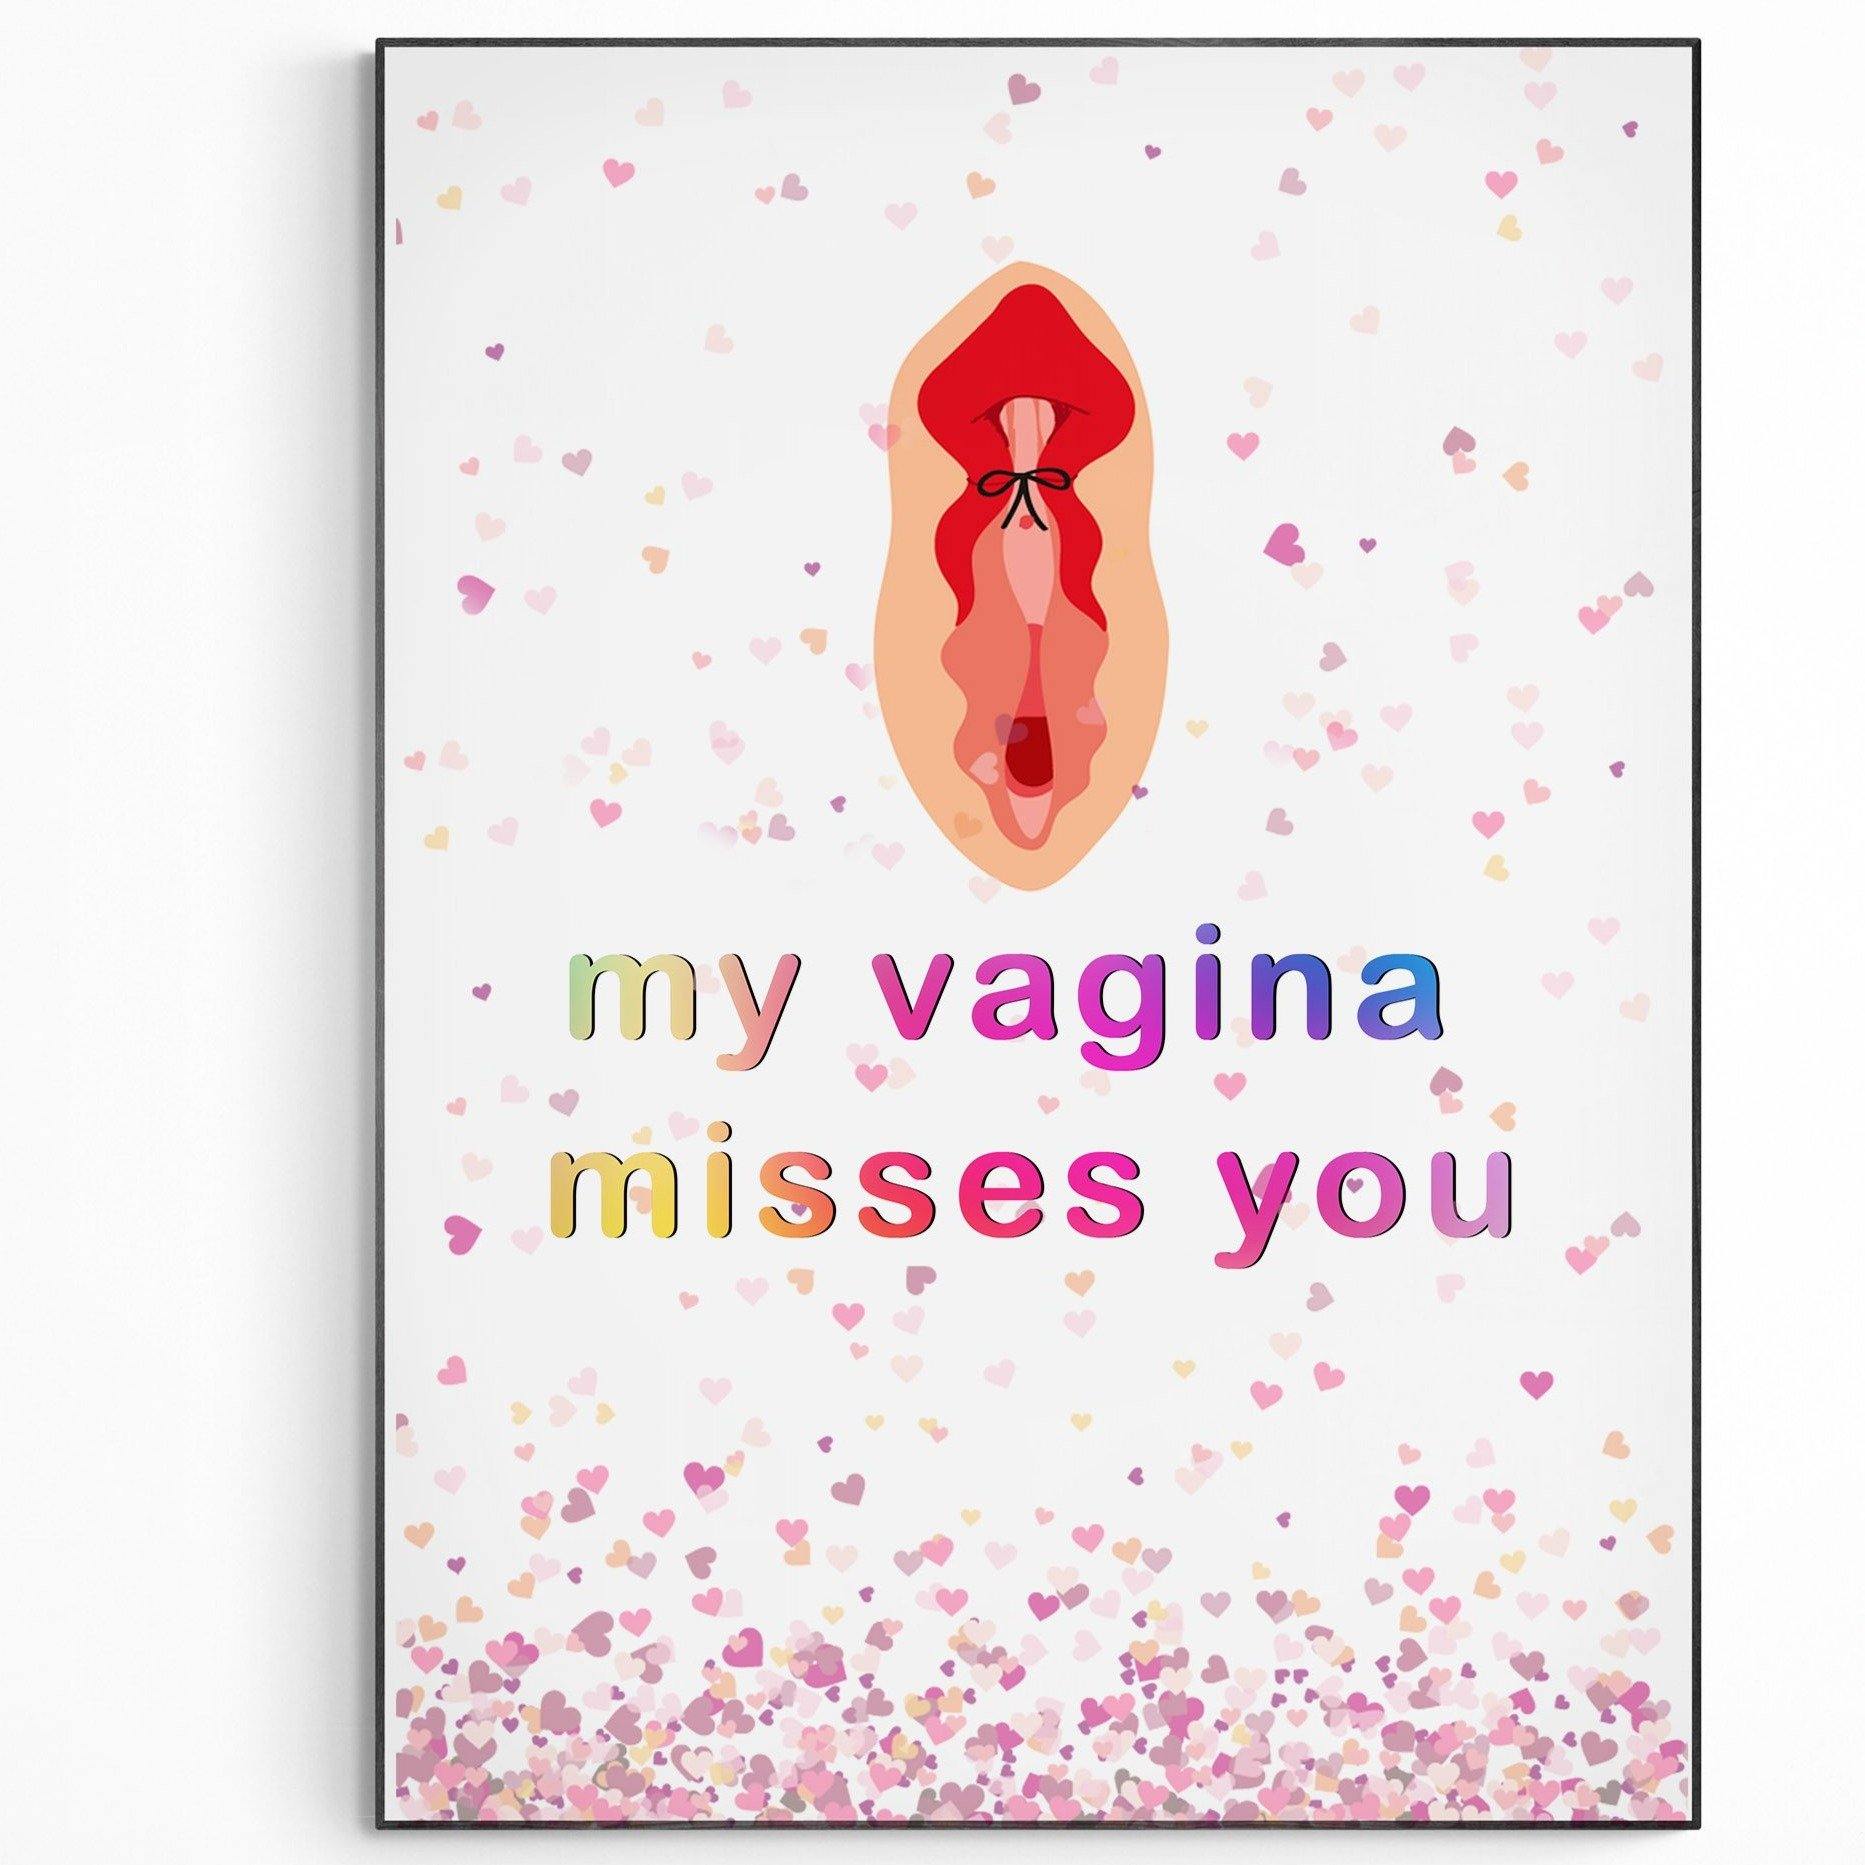 My Vagina Miss You | Original Poster Art | Fun Print Quote | Motivational Poster Wall Art Decor | Greeting Card Gifts | Variety Sizes